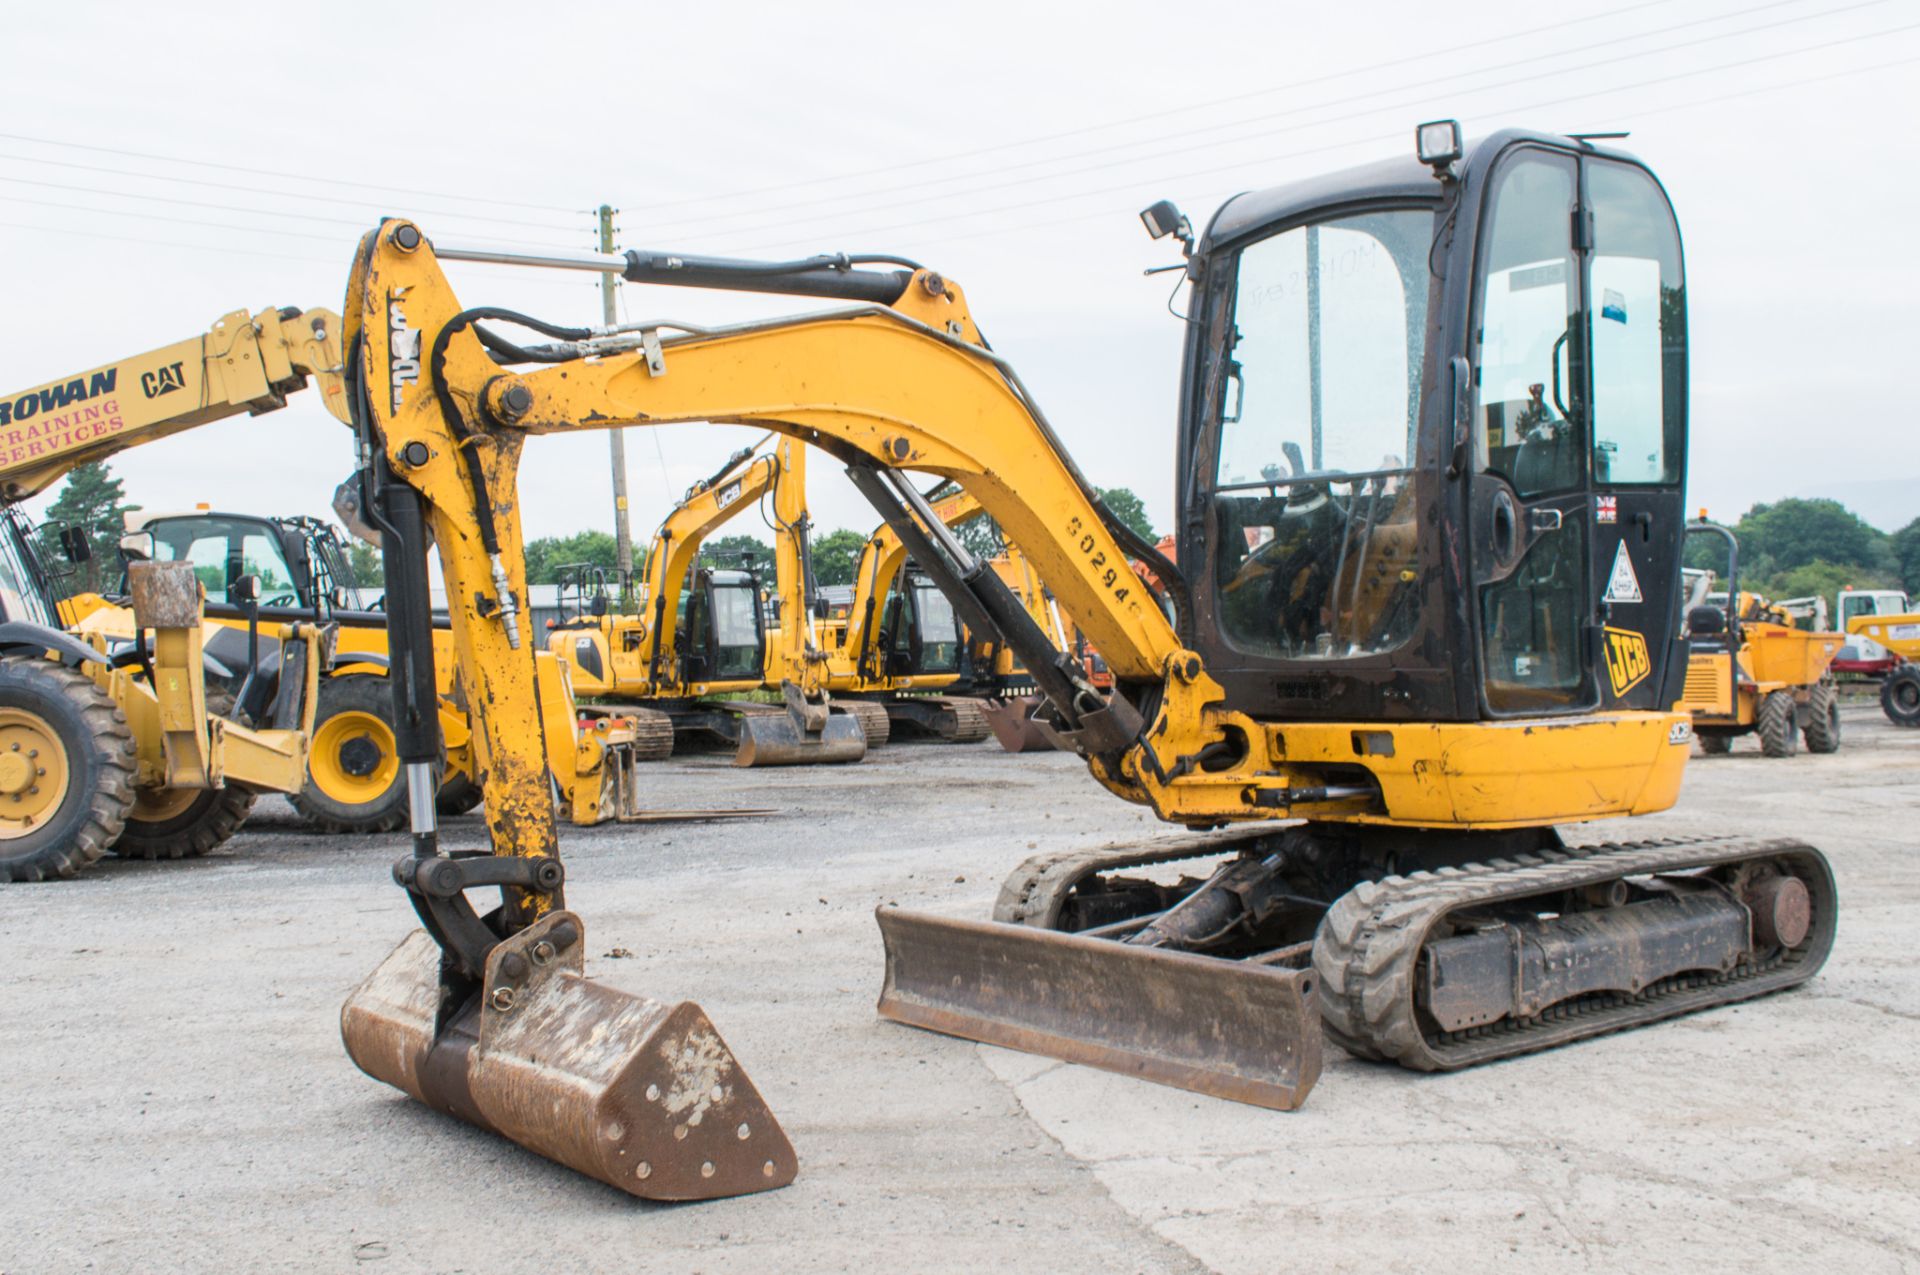 JCB 8025 CTS 2.5 tonne rubber tracked mini excavator Year: 2013 S/N: 2226144 Recorded Hours: 2961